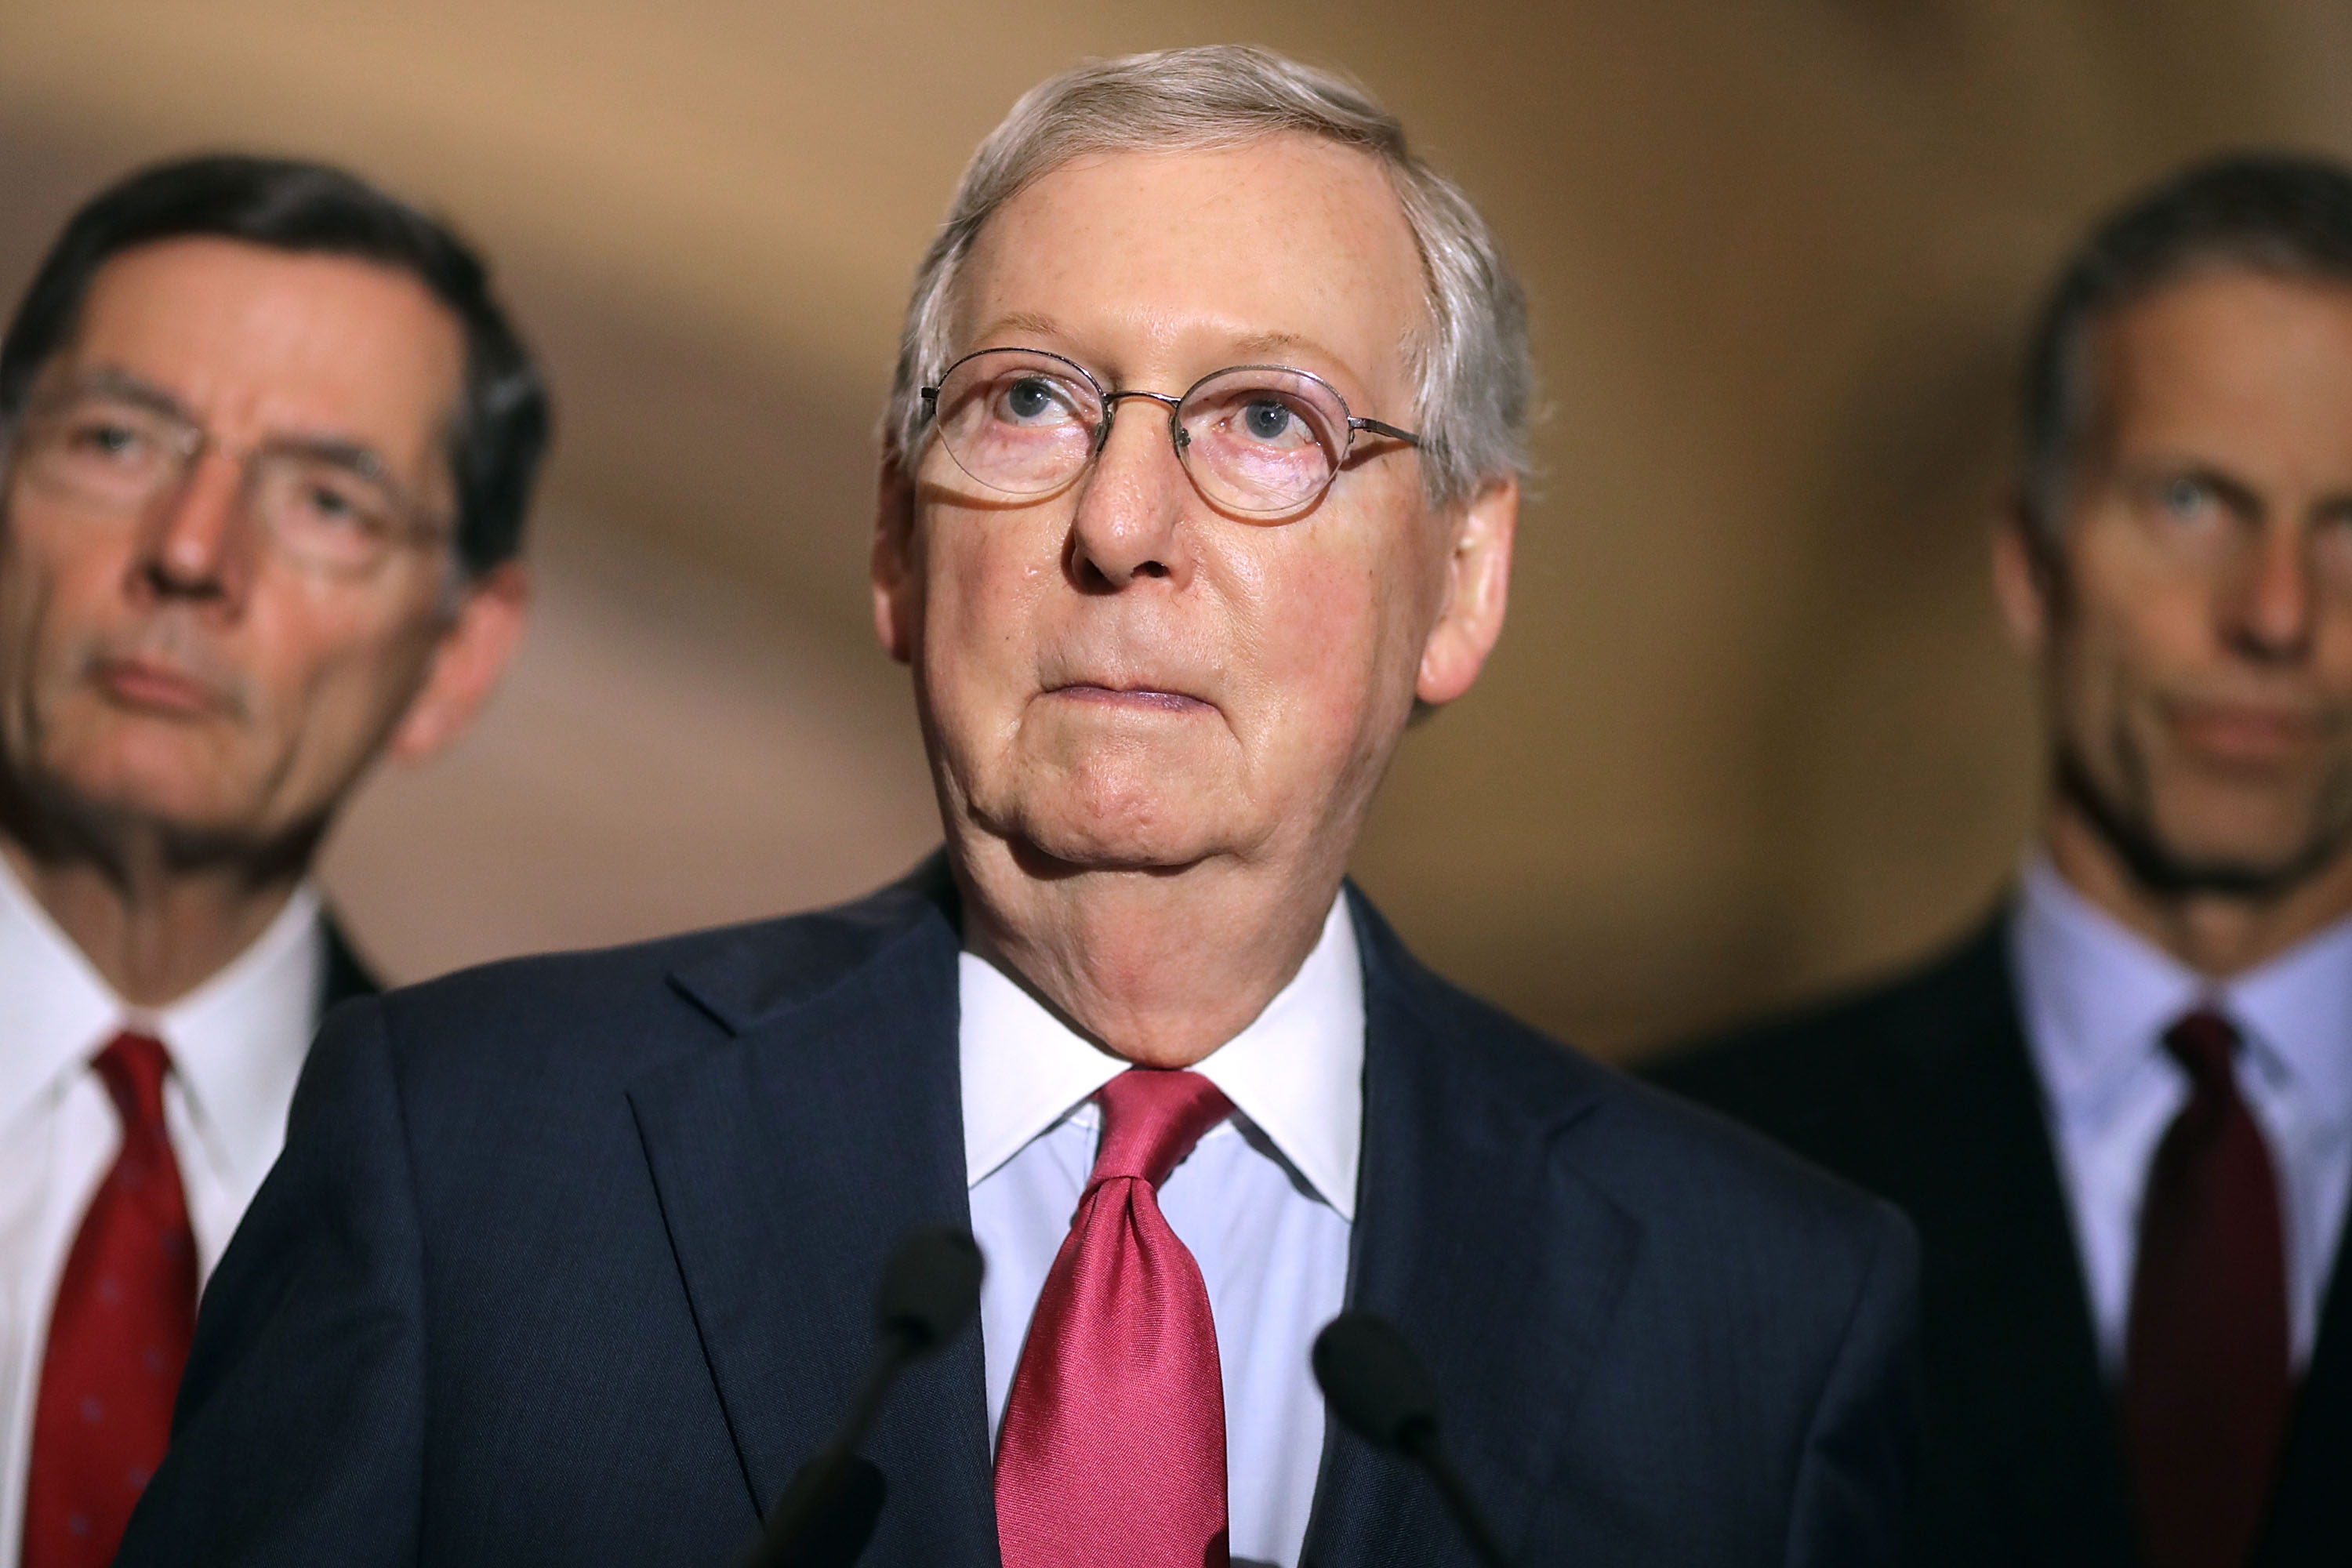 Senate Majority Leader Mitch McConnell (R-KY) talks to reporters with Sen. John Barrosso (R-WY) (L) and Sen. John Thune (R-SD) following their party's weekly policy luncheon at the U.S. Capitol May 16, 2017 in Washington, DC. (Getty Images)